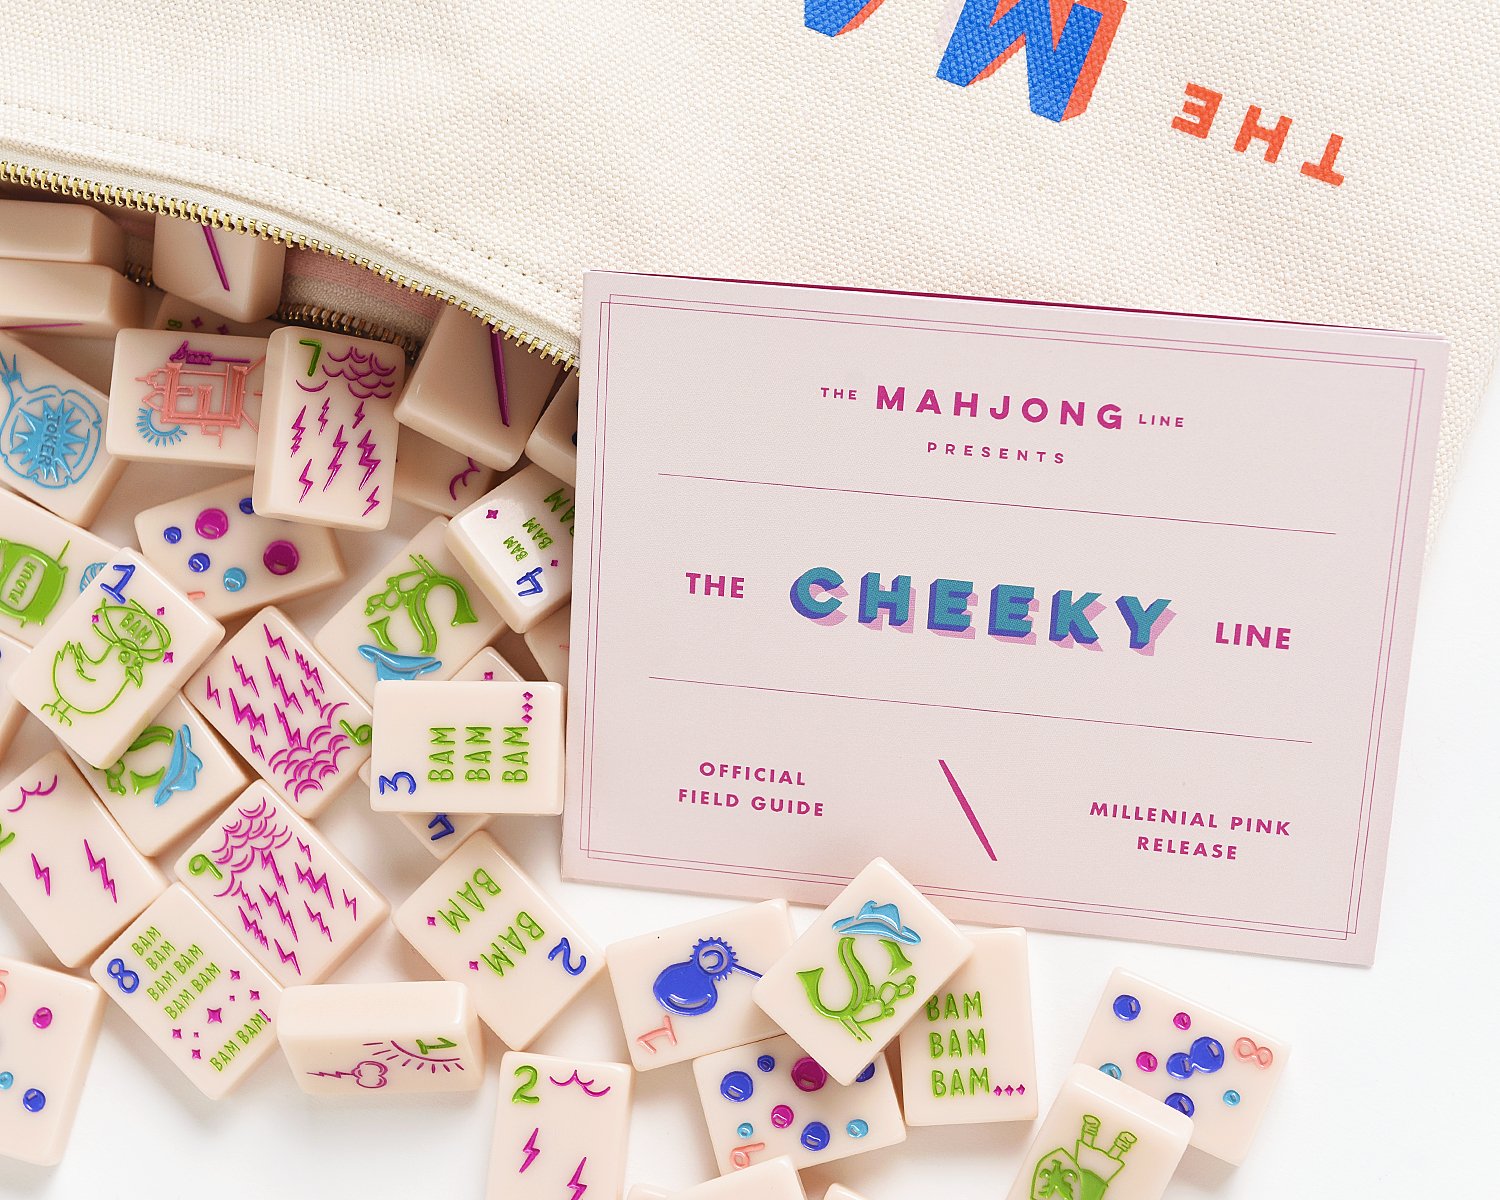 CustoMy Mahjong - Aww! Look at this adorable Line Friends